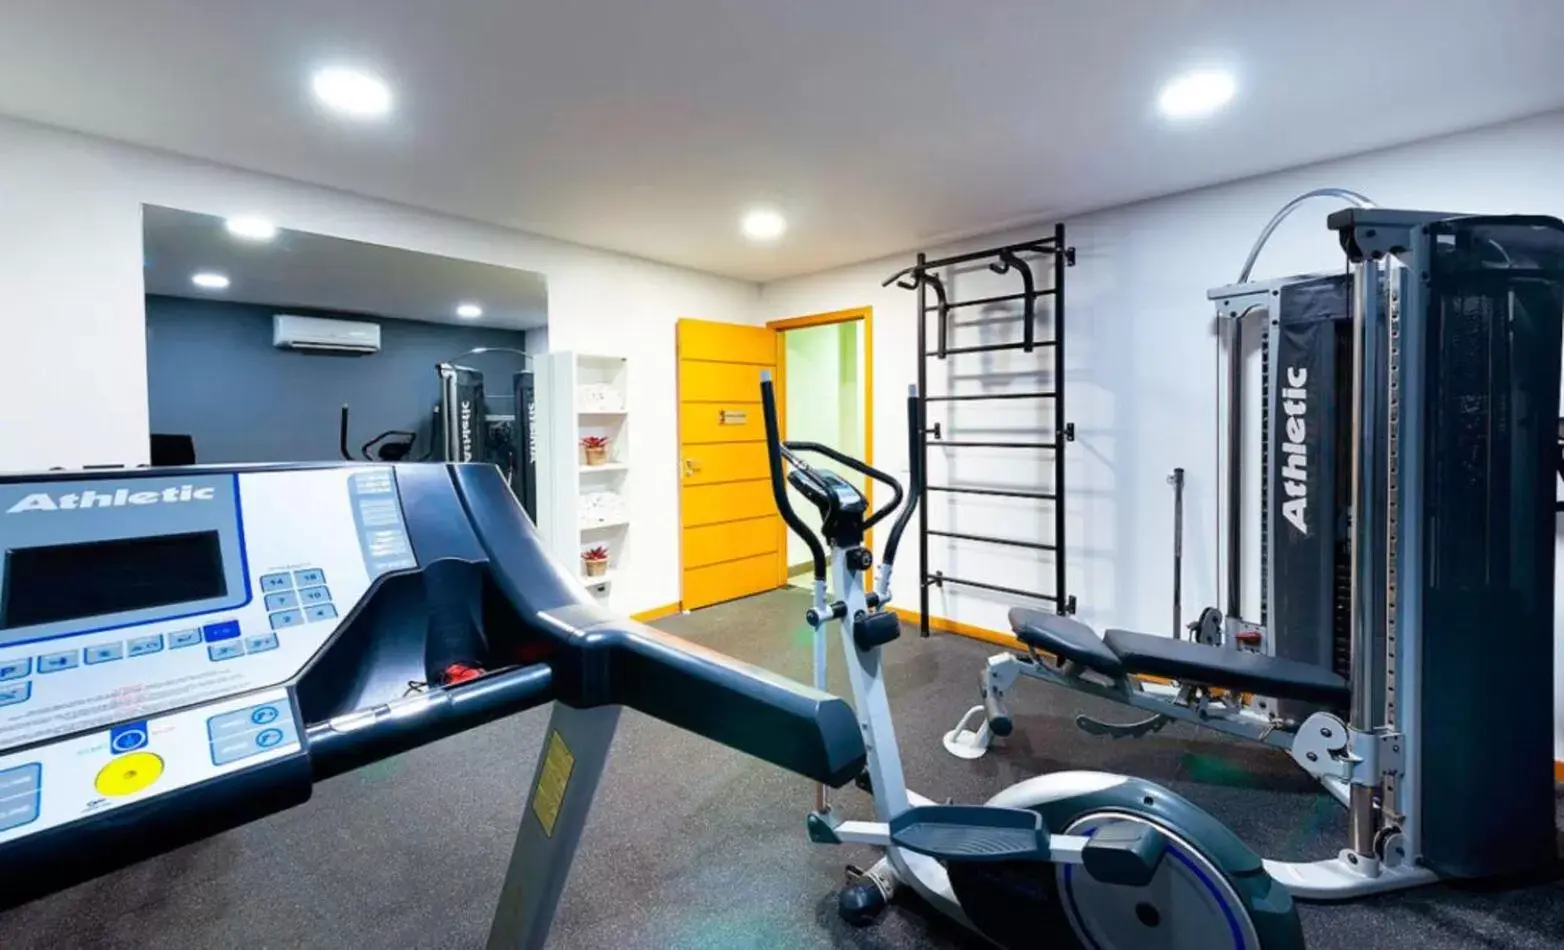 Fitness centre/facilities, Fitness Center/Facilities in Oasis Cabo Frio